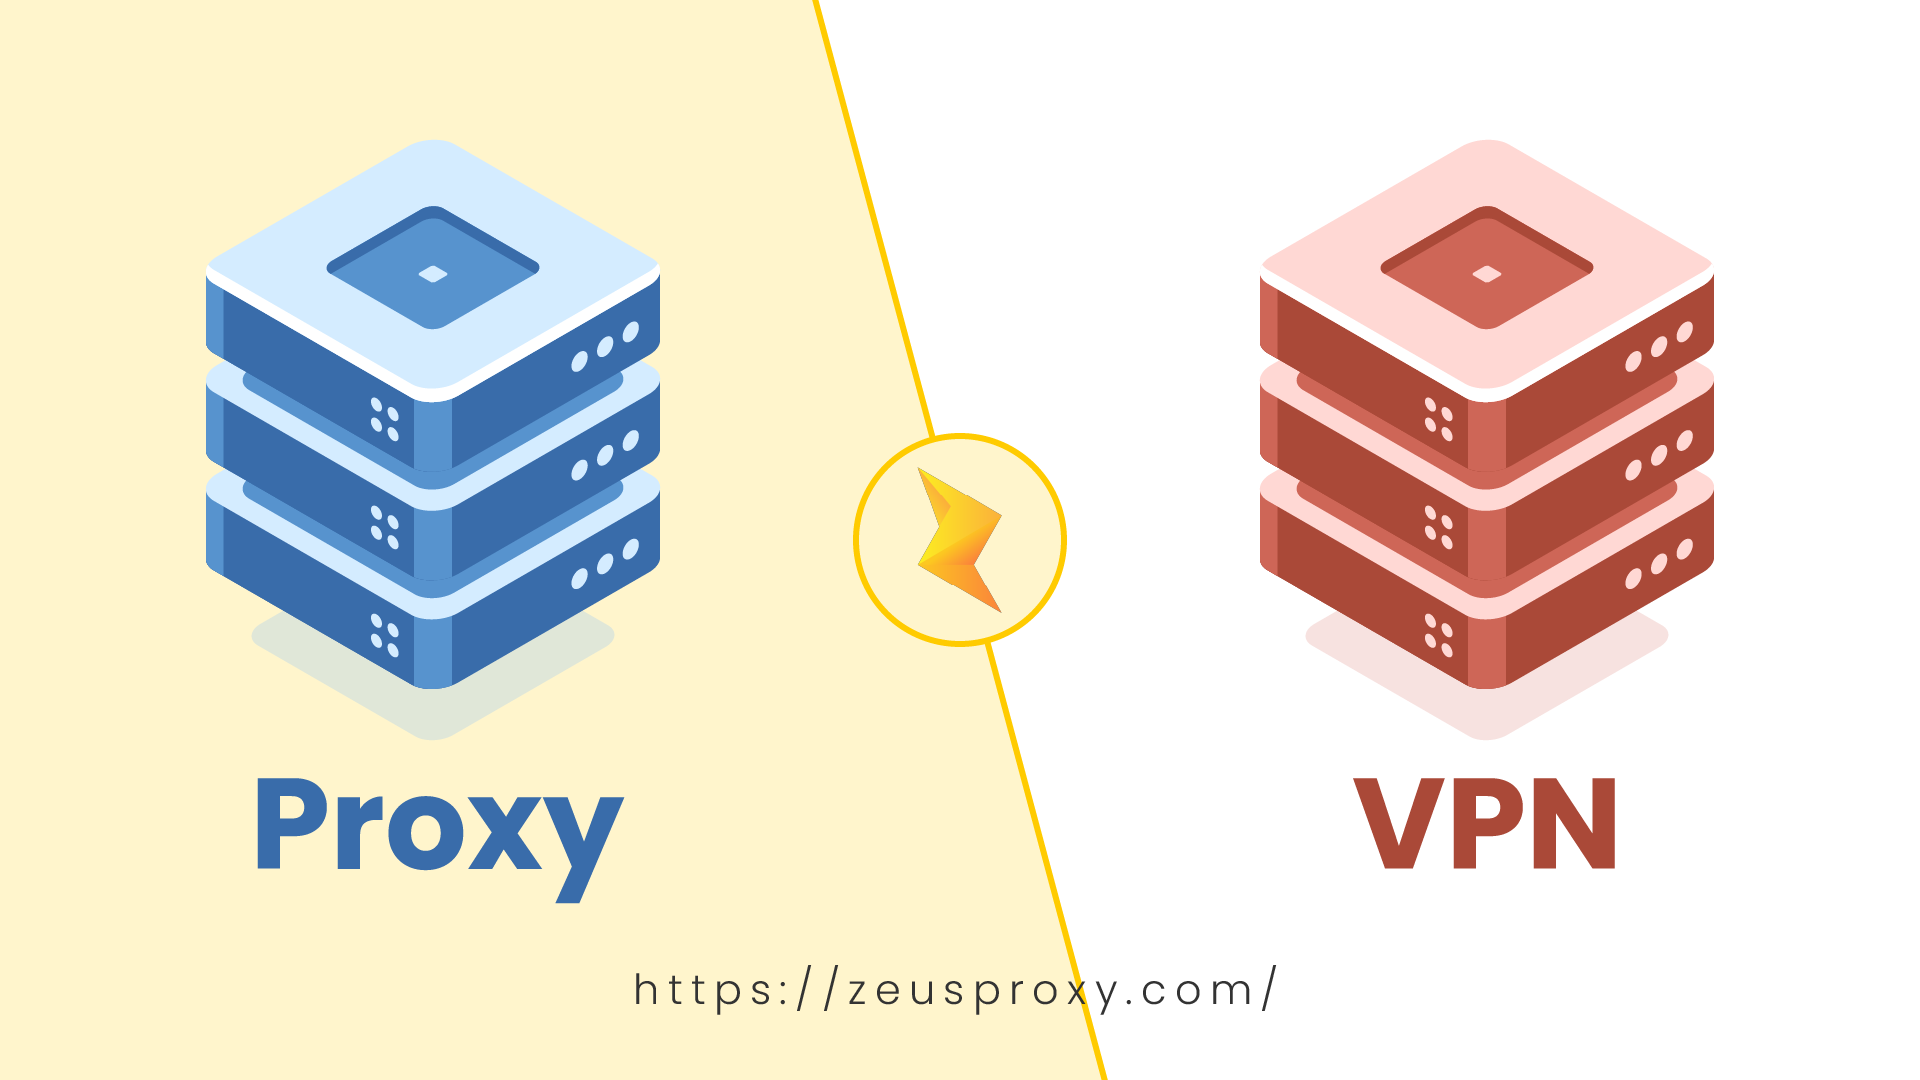 Proxy vs. VPN: What is the difference?